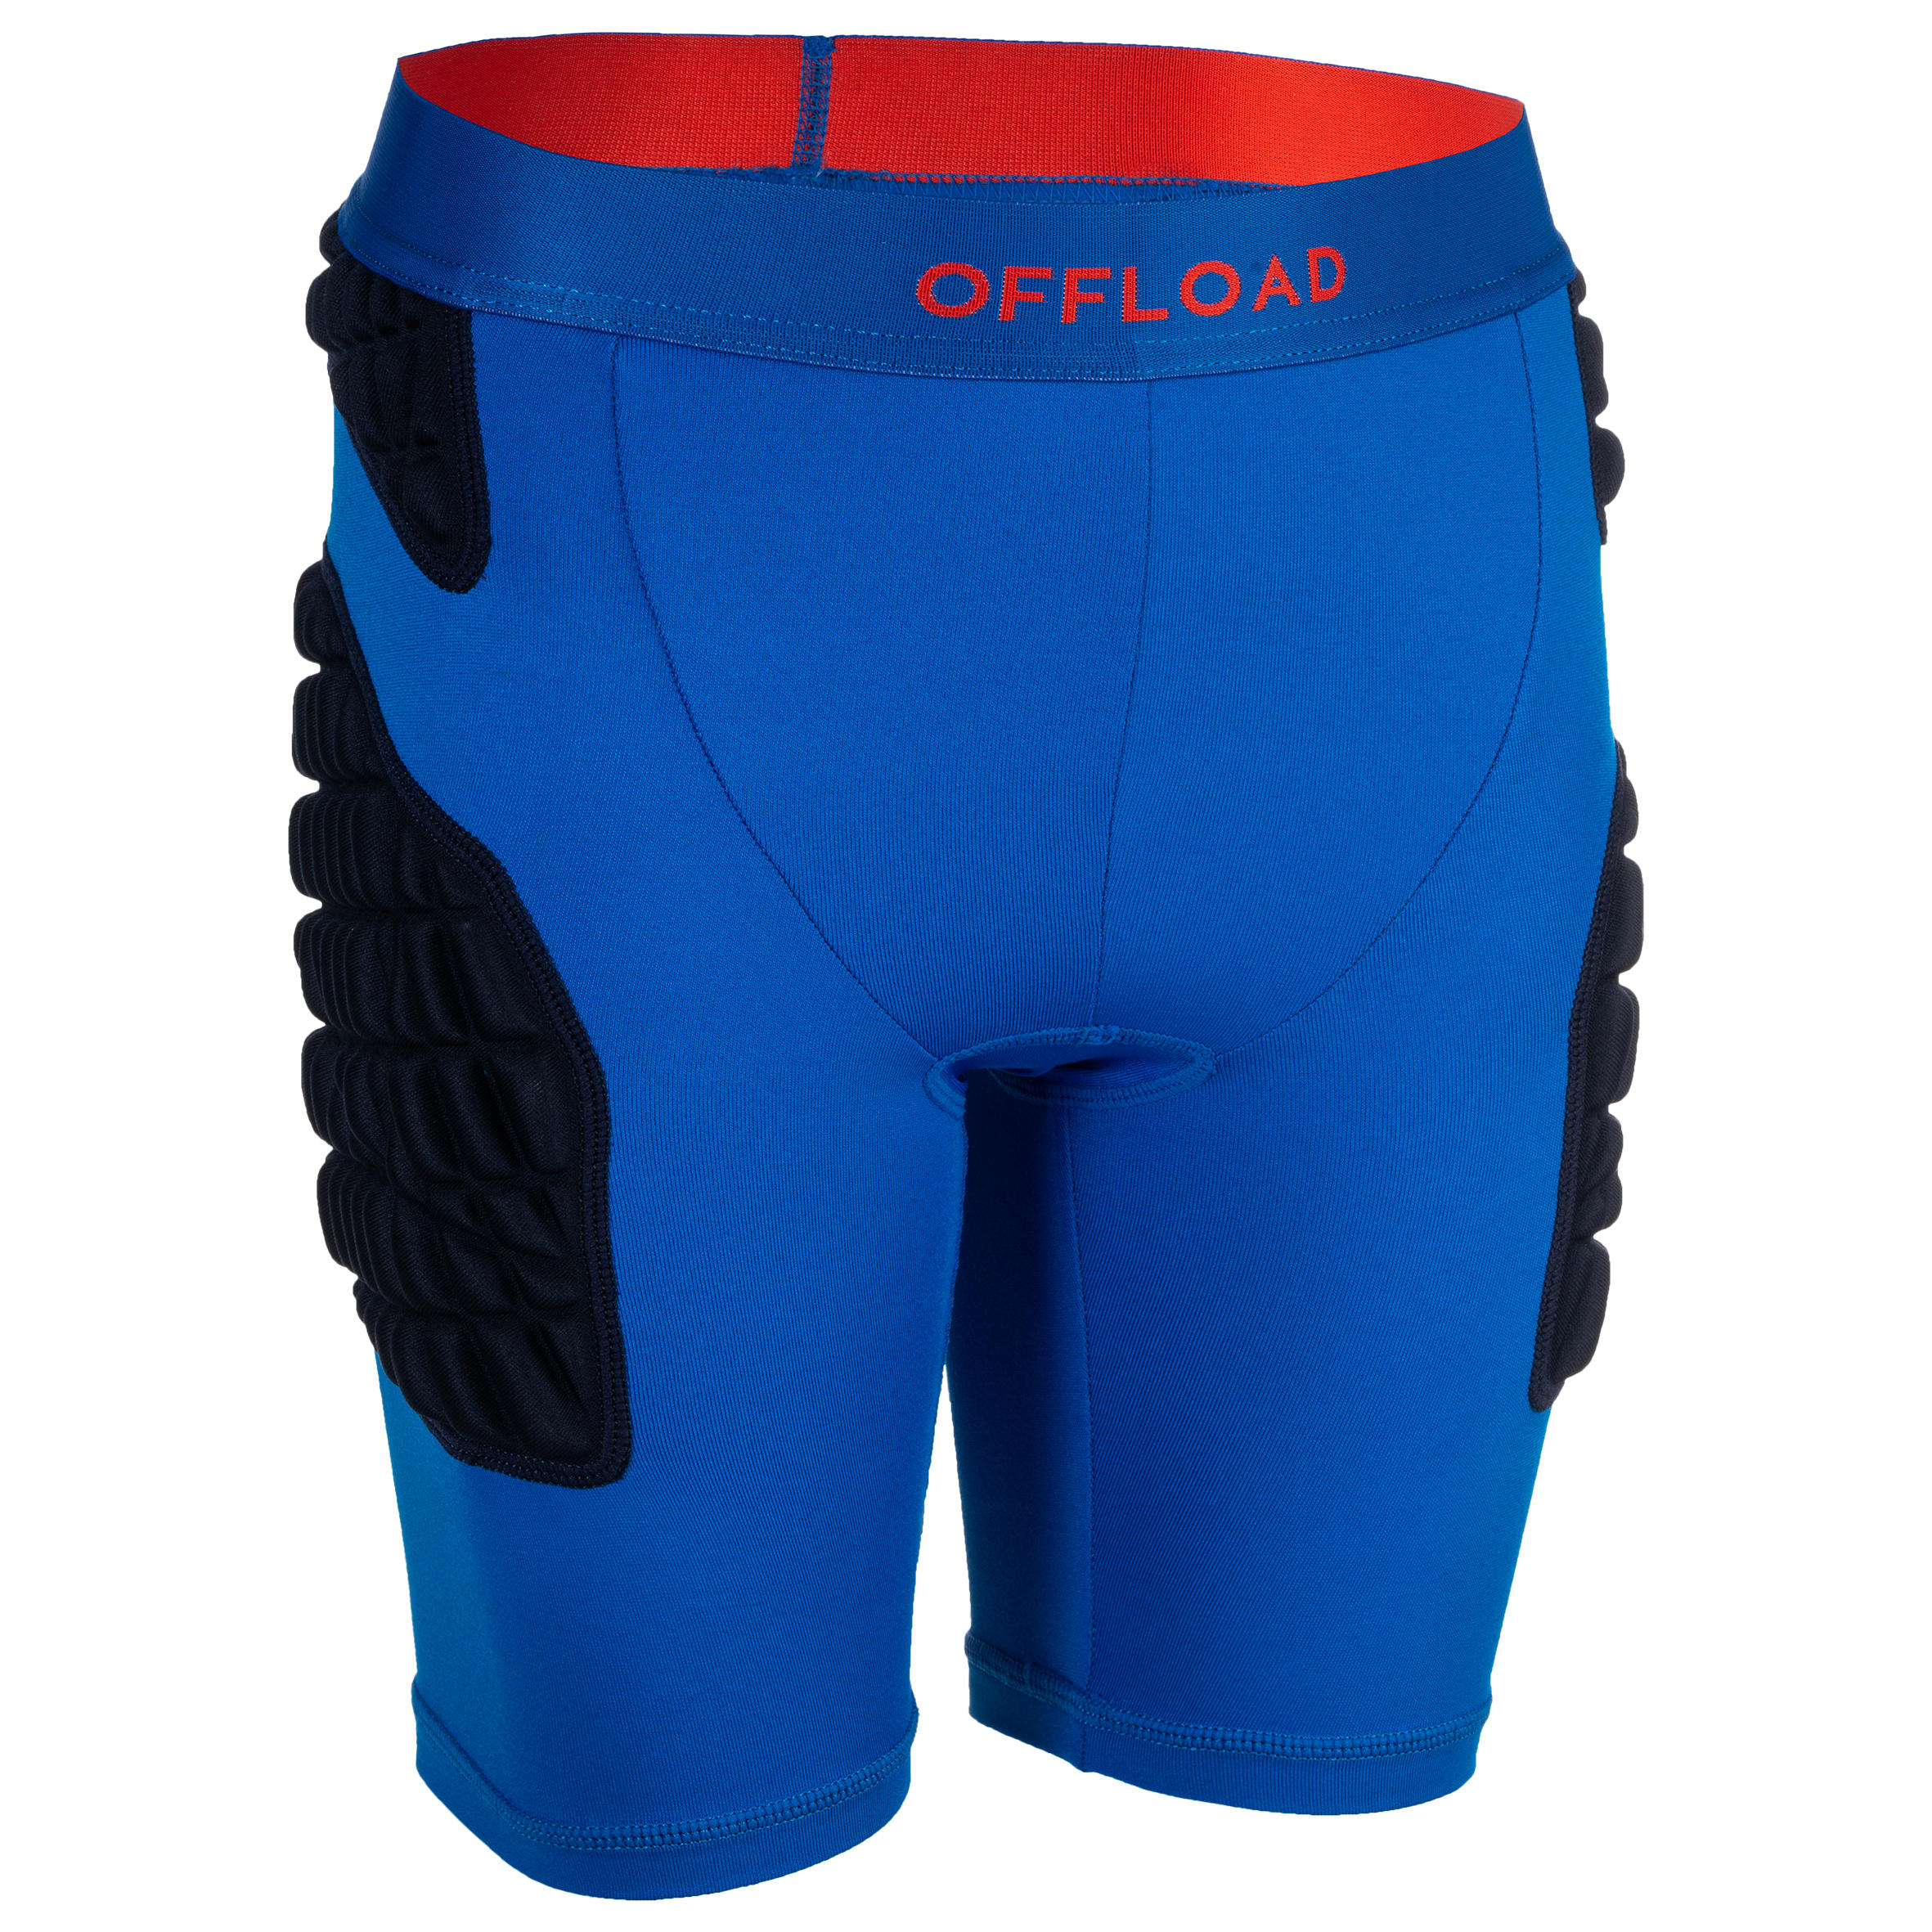 Kids' Protective Rugby Undershorts R500 - Blue 1/1